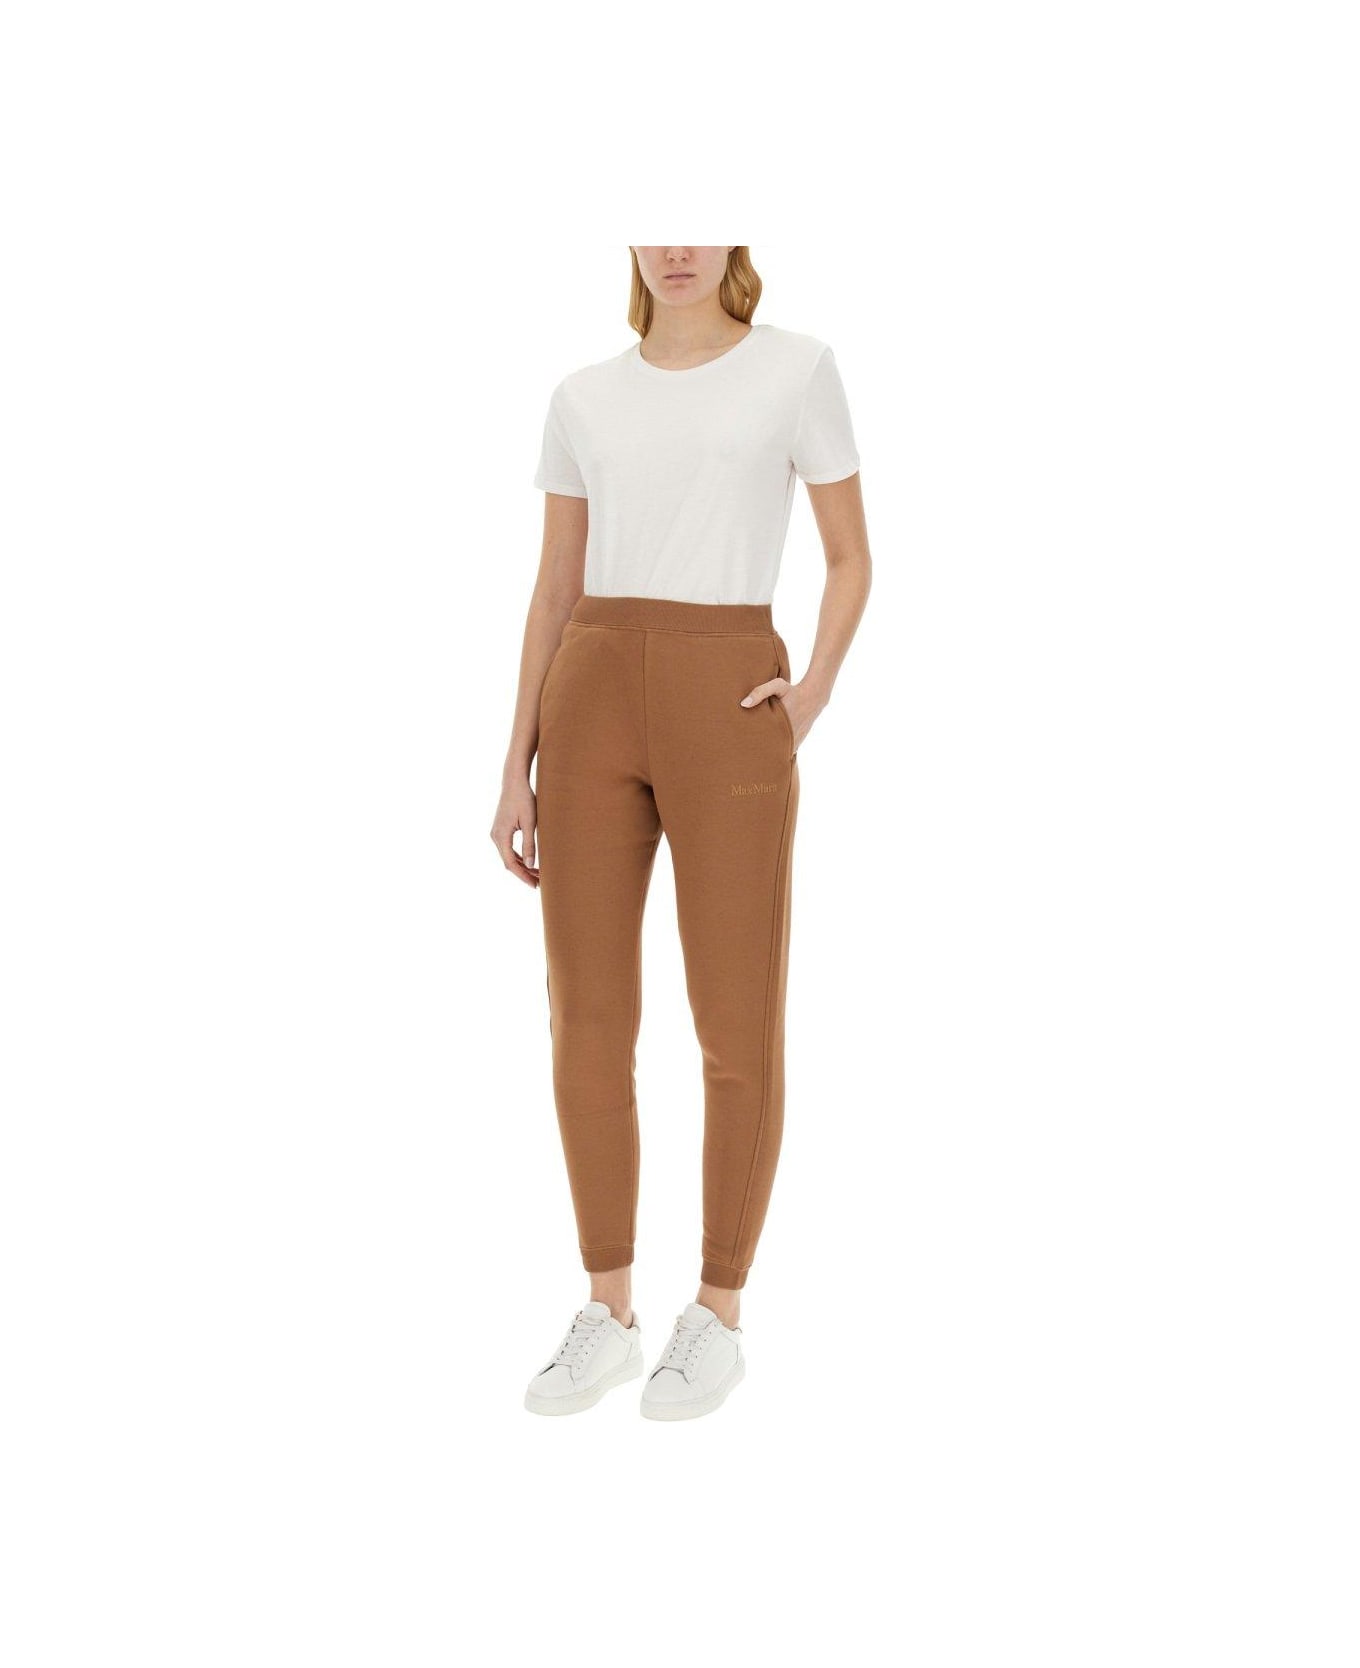 'S Max Mara Logo Embroidered Jogging Trousers - BEIGE